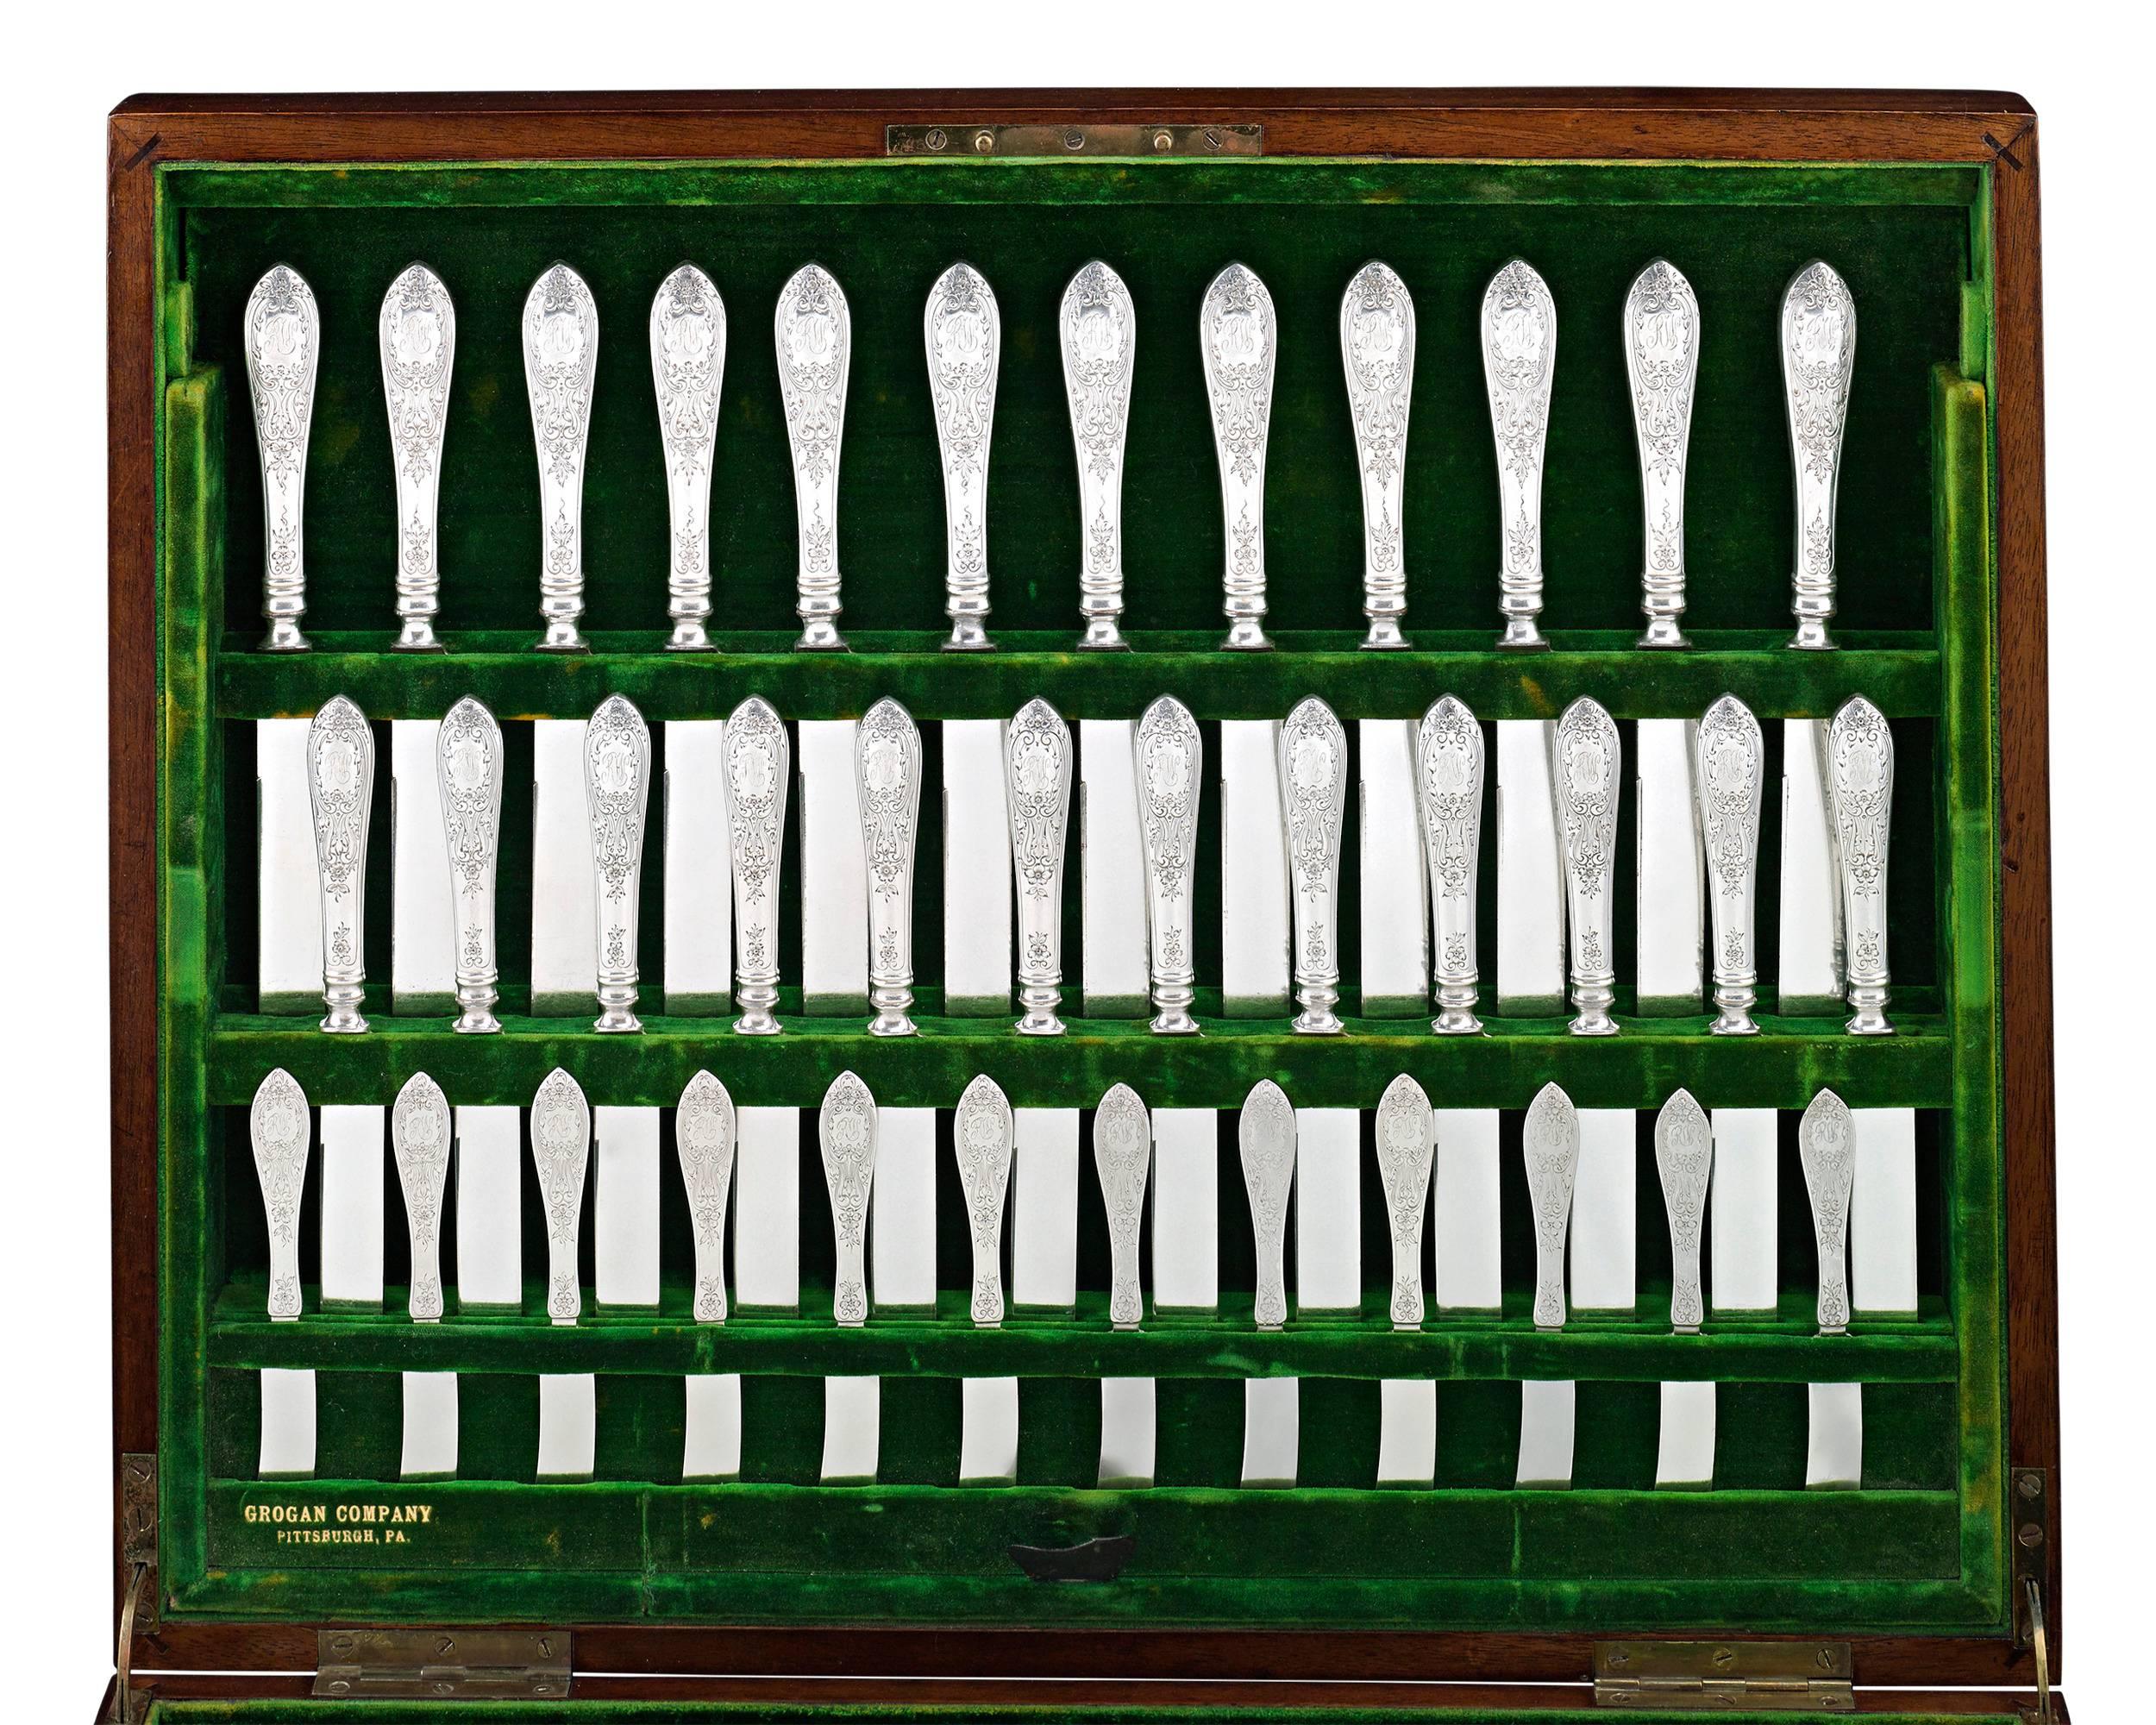 This rare 167-piece Wentworth sterling silver flatware service was crafted by the celebrated William B. Durgin Silver Company. Each piece bears an intricate, hand-chased pattern featuring florettes, acanthus leaves, scrolls, and an open cartouche